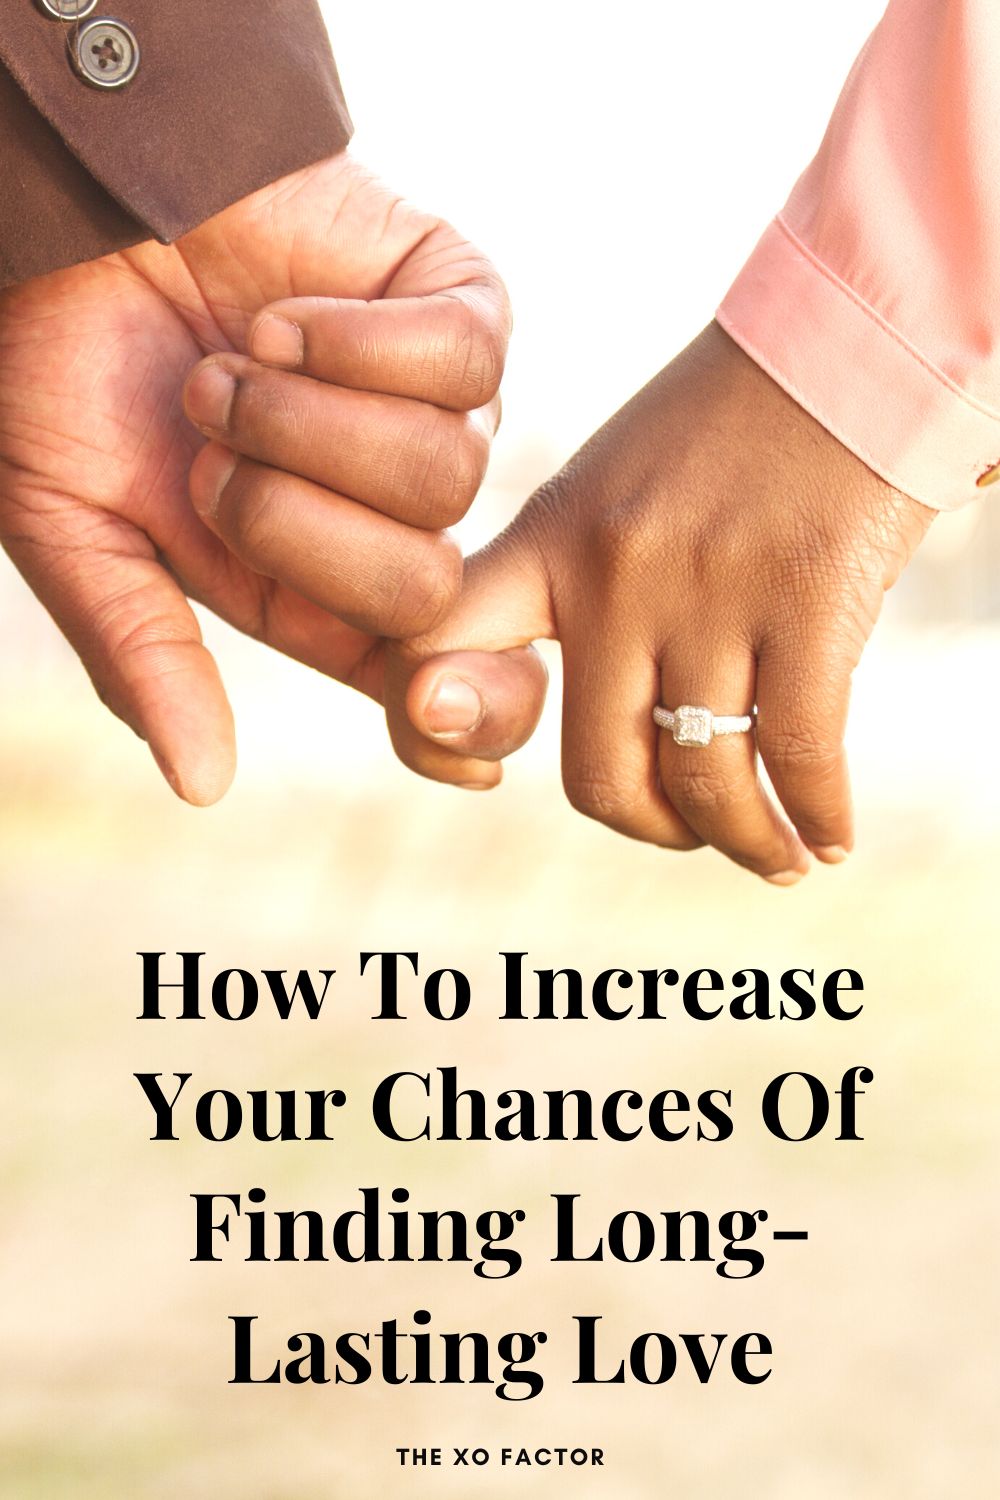 How To Increase Your Chances Of Finding Long-Lasting Love